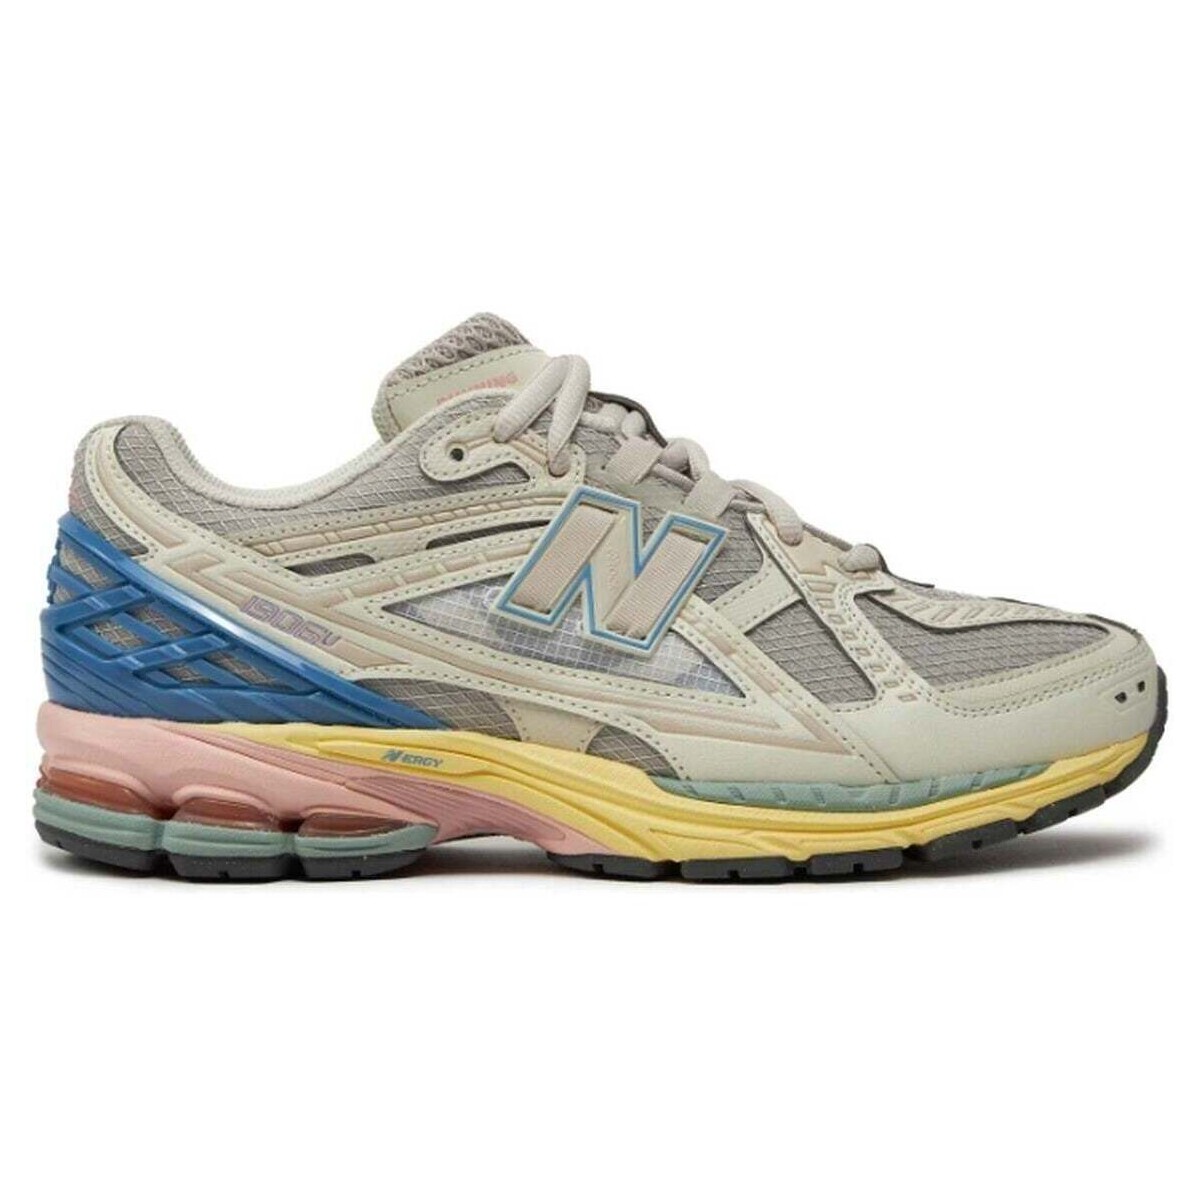 Chaussures Baskets mode New Balance  Multicolore